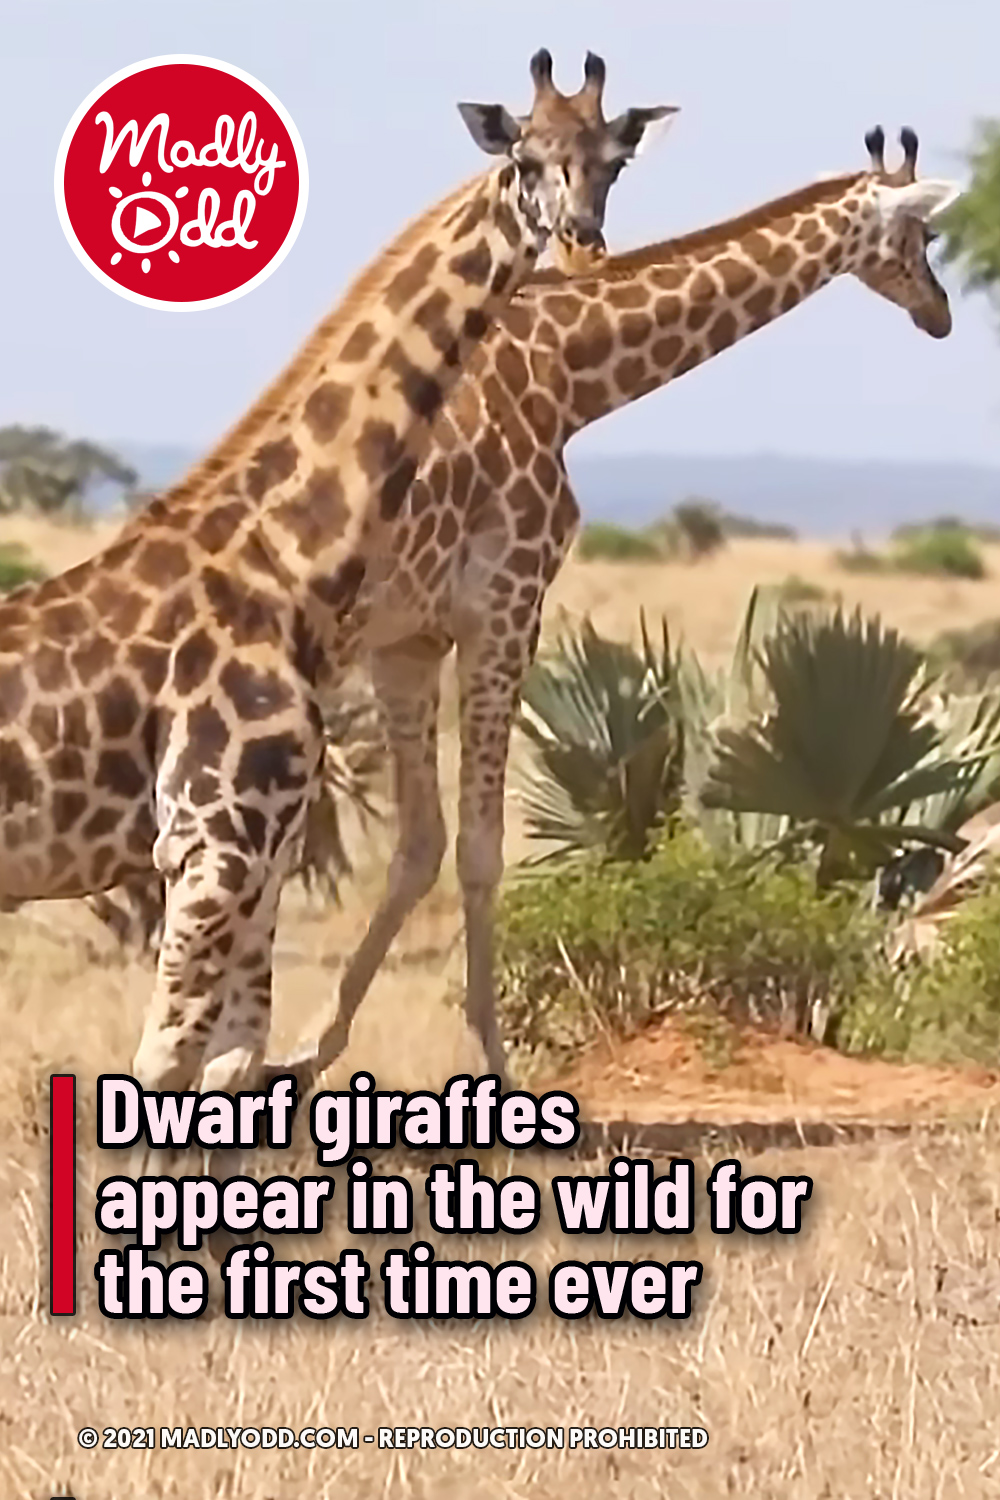 Dwarf giraffes appear in the wild for the first time ever